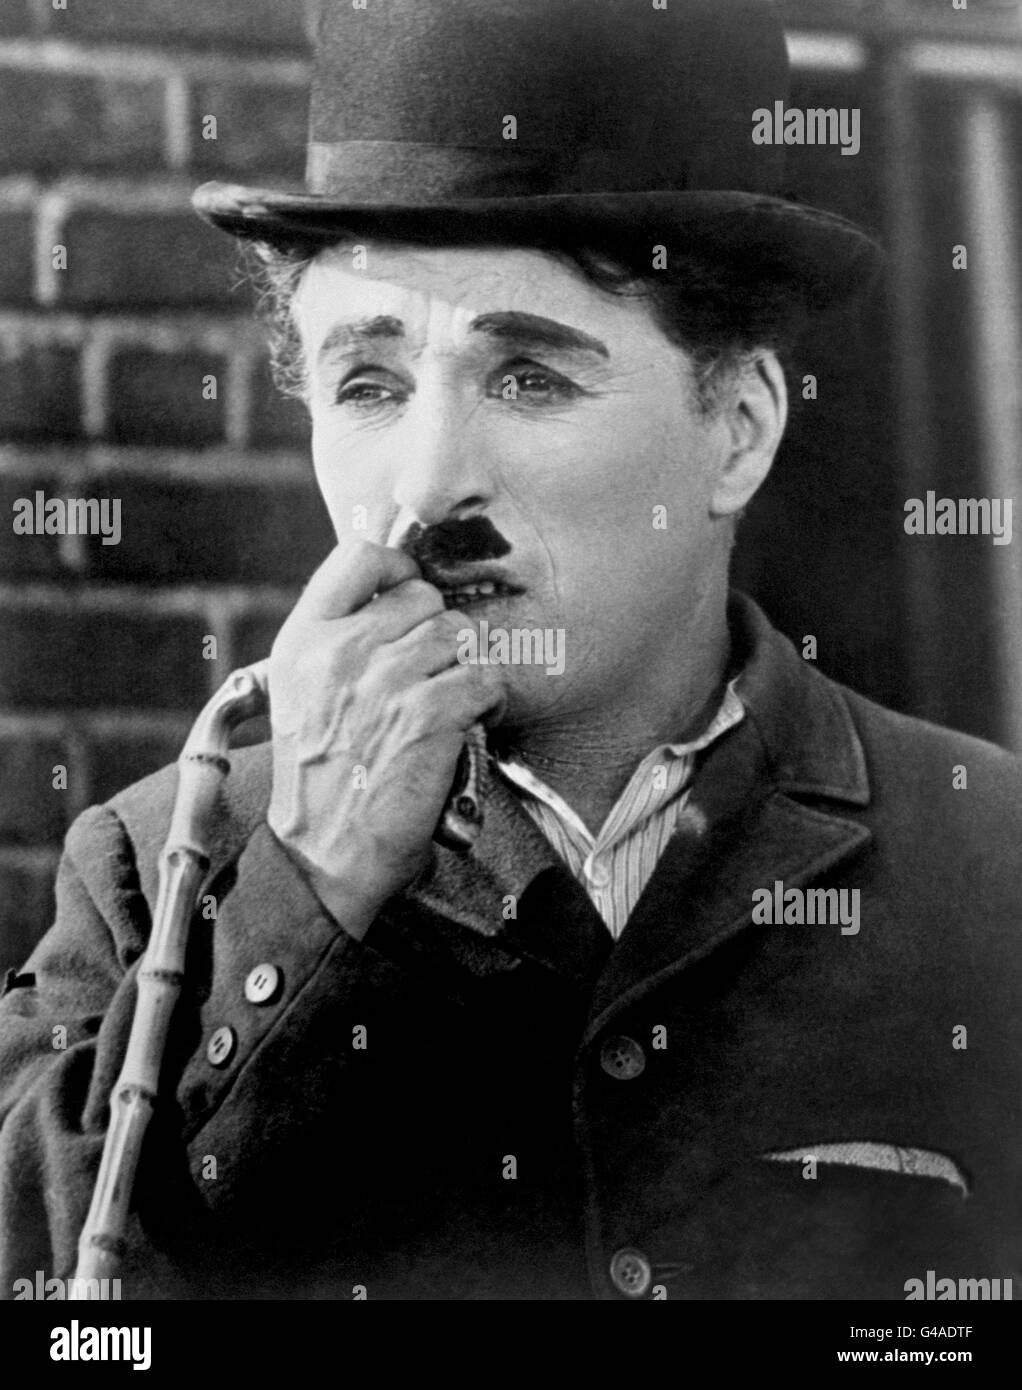 PA NEWS PHOTO 1934 CHARLIE CHAPLIN Chaplin's knighthood was blocked for nearly 20 years because of his colourful romantic and political lifestyle, according to secret documents released, Sunday July 21, 2002.In the US, where the star of silent films lived for 42 years until 1952, he was reviled as a communist sympathiser and for a series of other grave moral charges, government documents released under the 30-year rule said. *20/07/02: Charlie Chaplin's knighthood was blocked for nearly 20 years because of his colourful romantic and political lifestyle, according to secret documents. In the Stock Photo